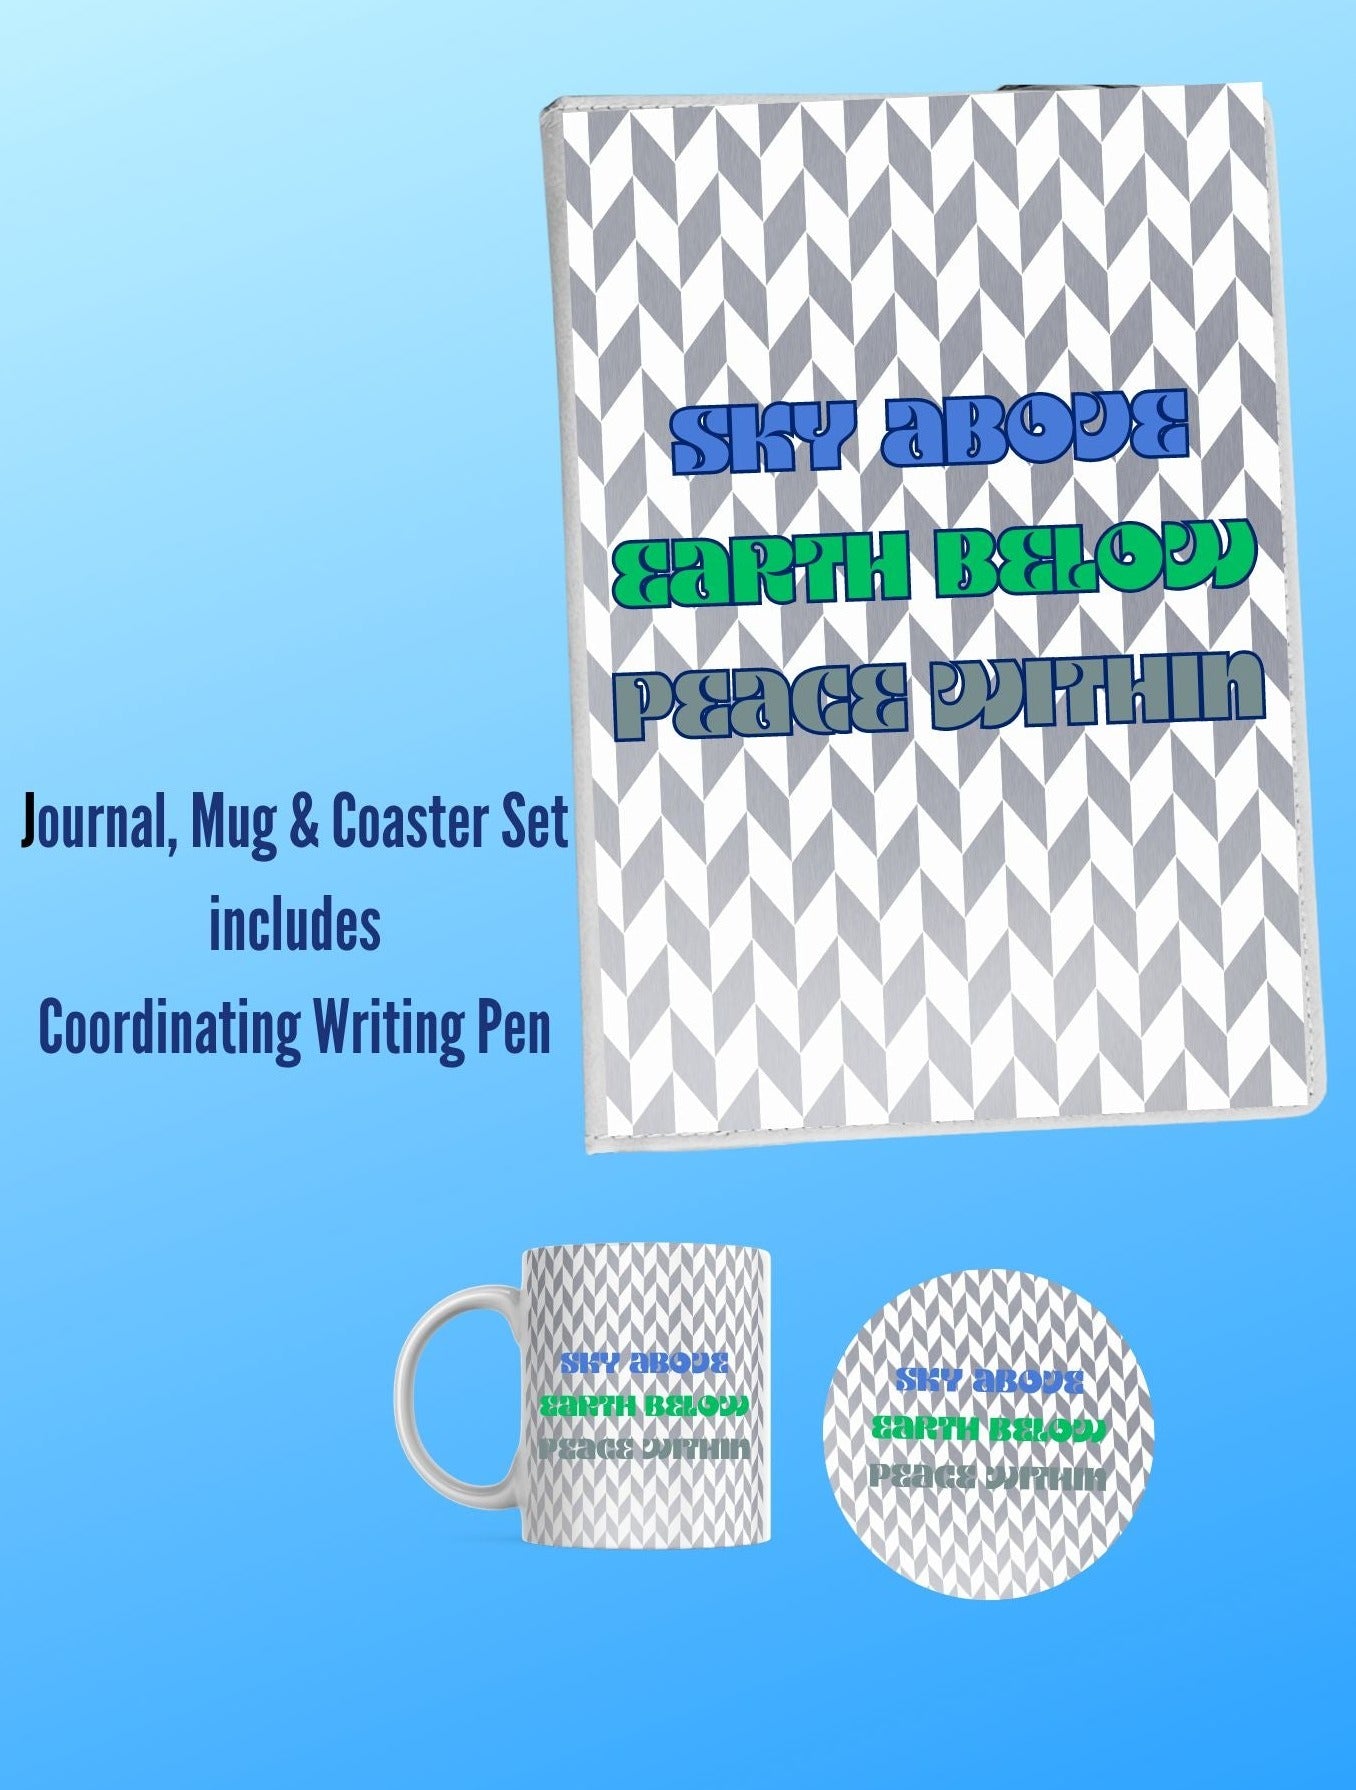 A journal of 100 lined pages with a matching mug and coaster.